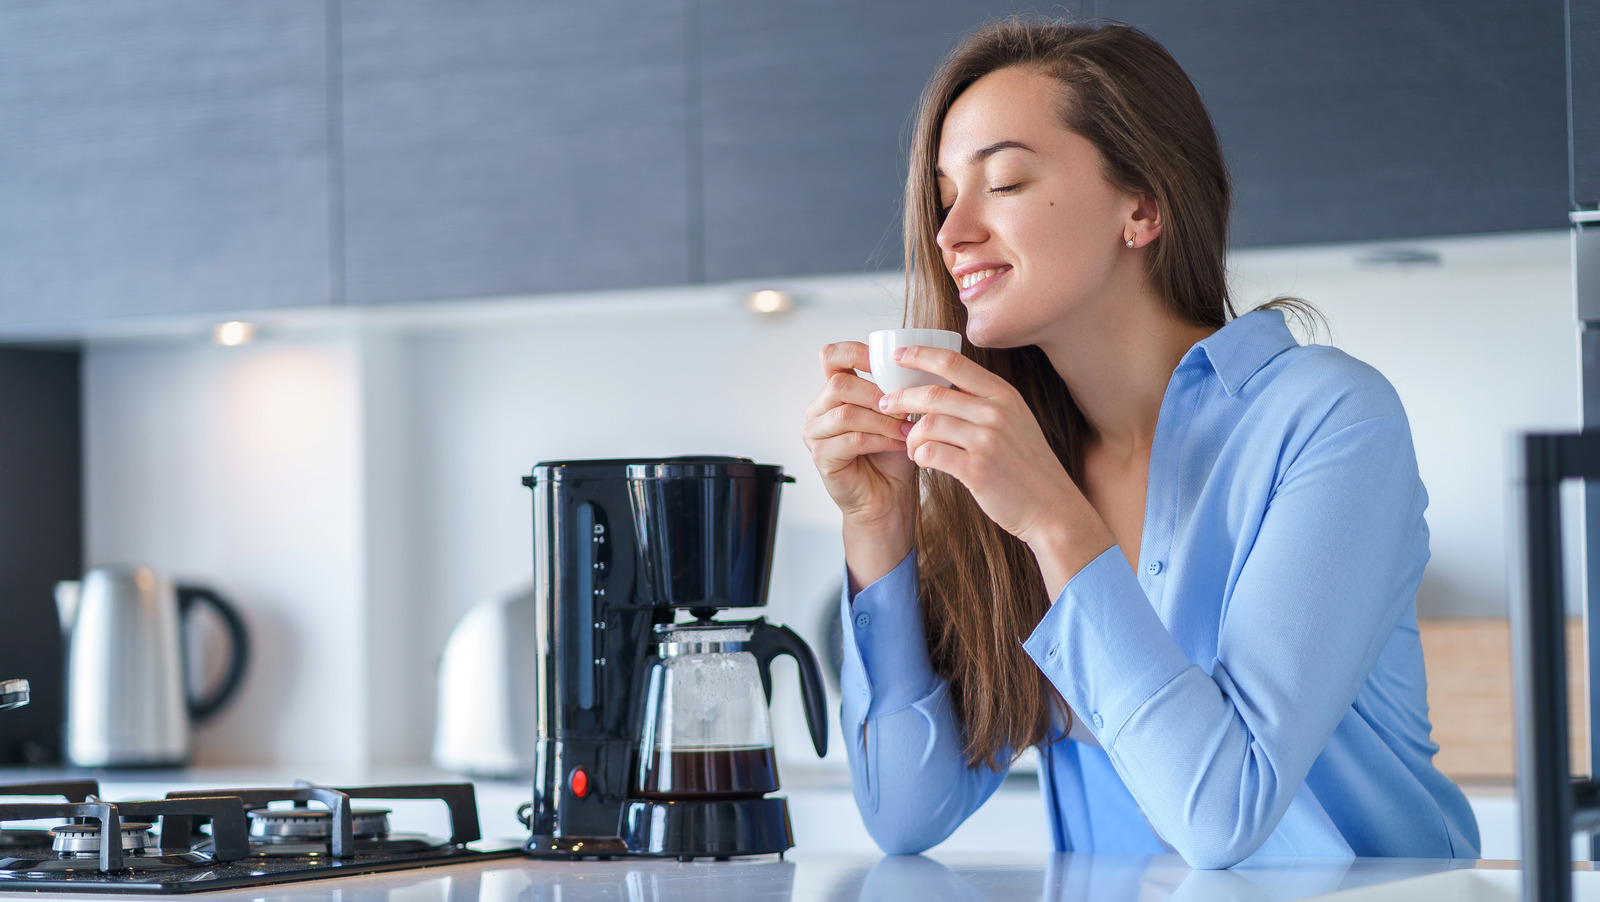 How to clean the coffee pot at home: natural and effective remedies